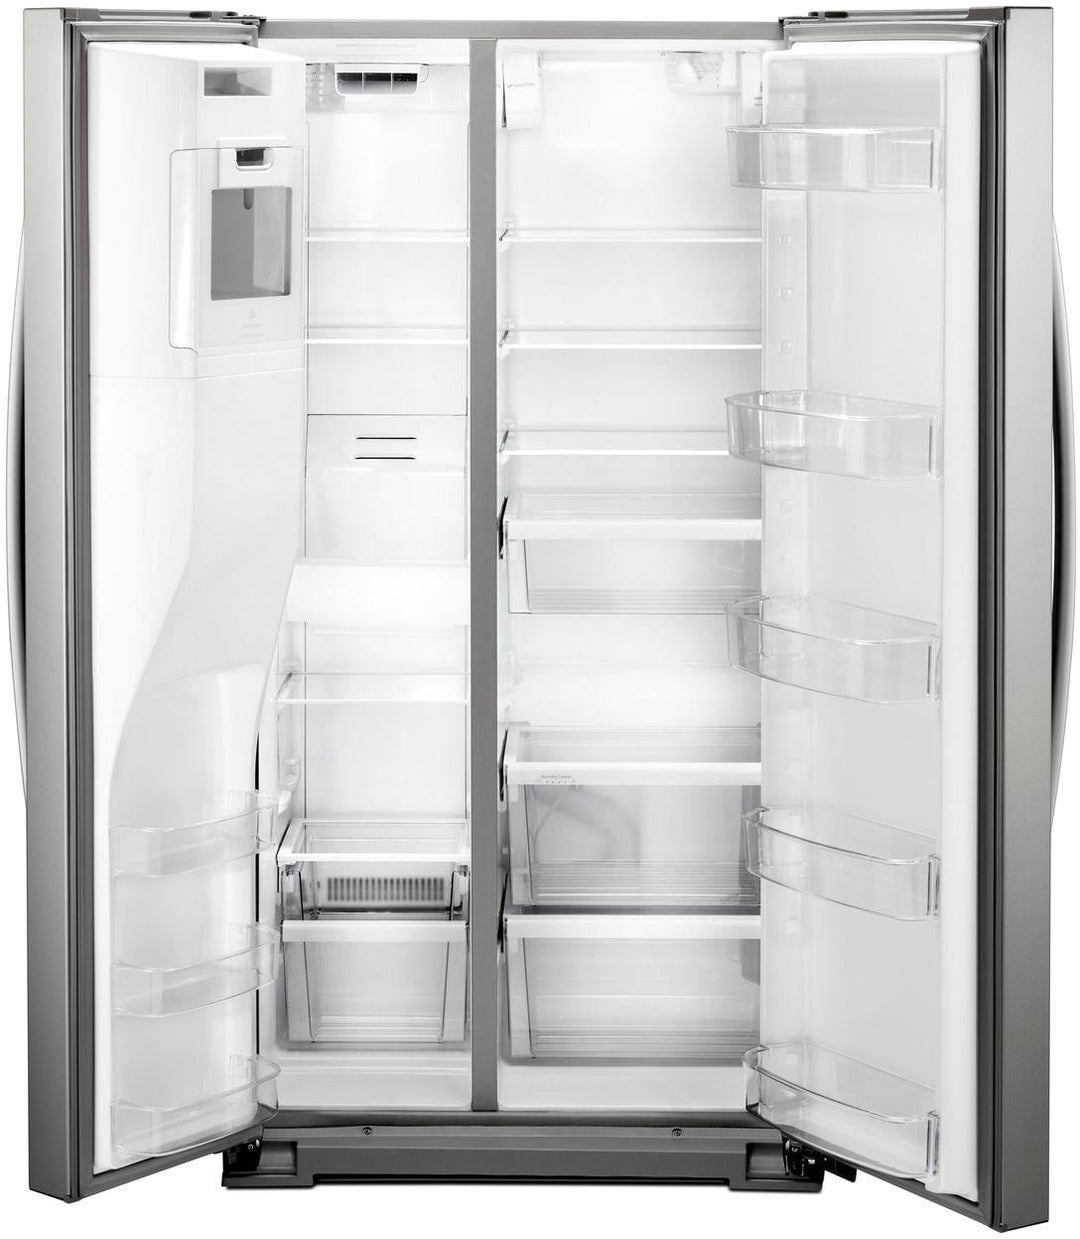 Whirlpool - 20.6 Cu. Ft. Side-by-Side Counter-Depth Refrigerator - Stainless steel_2